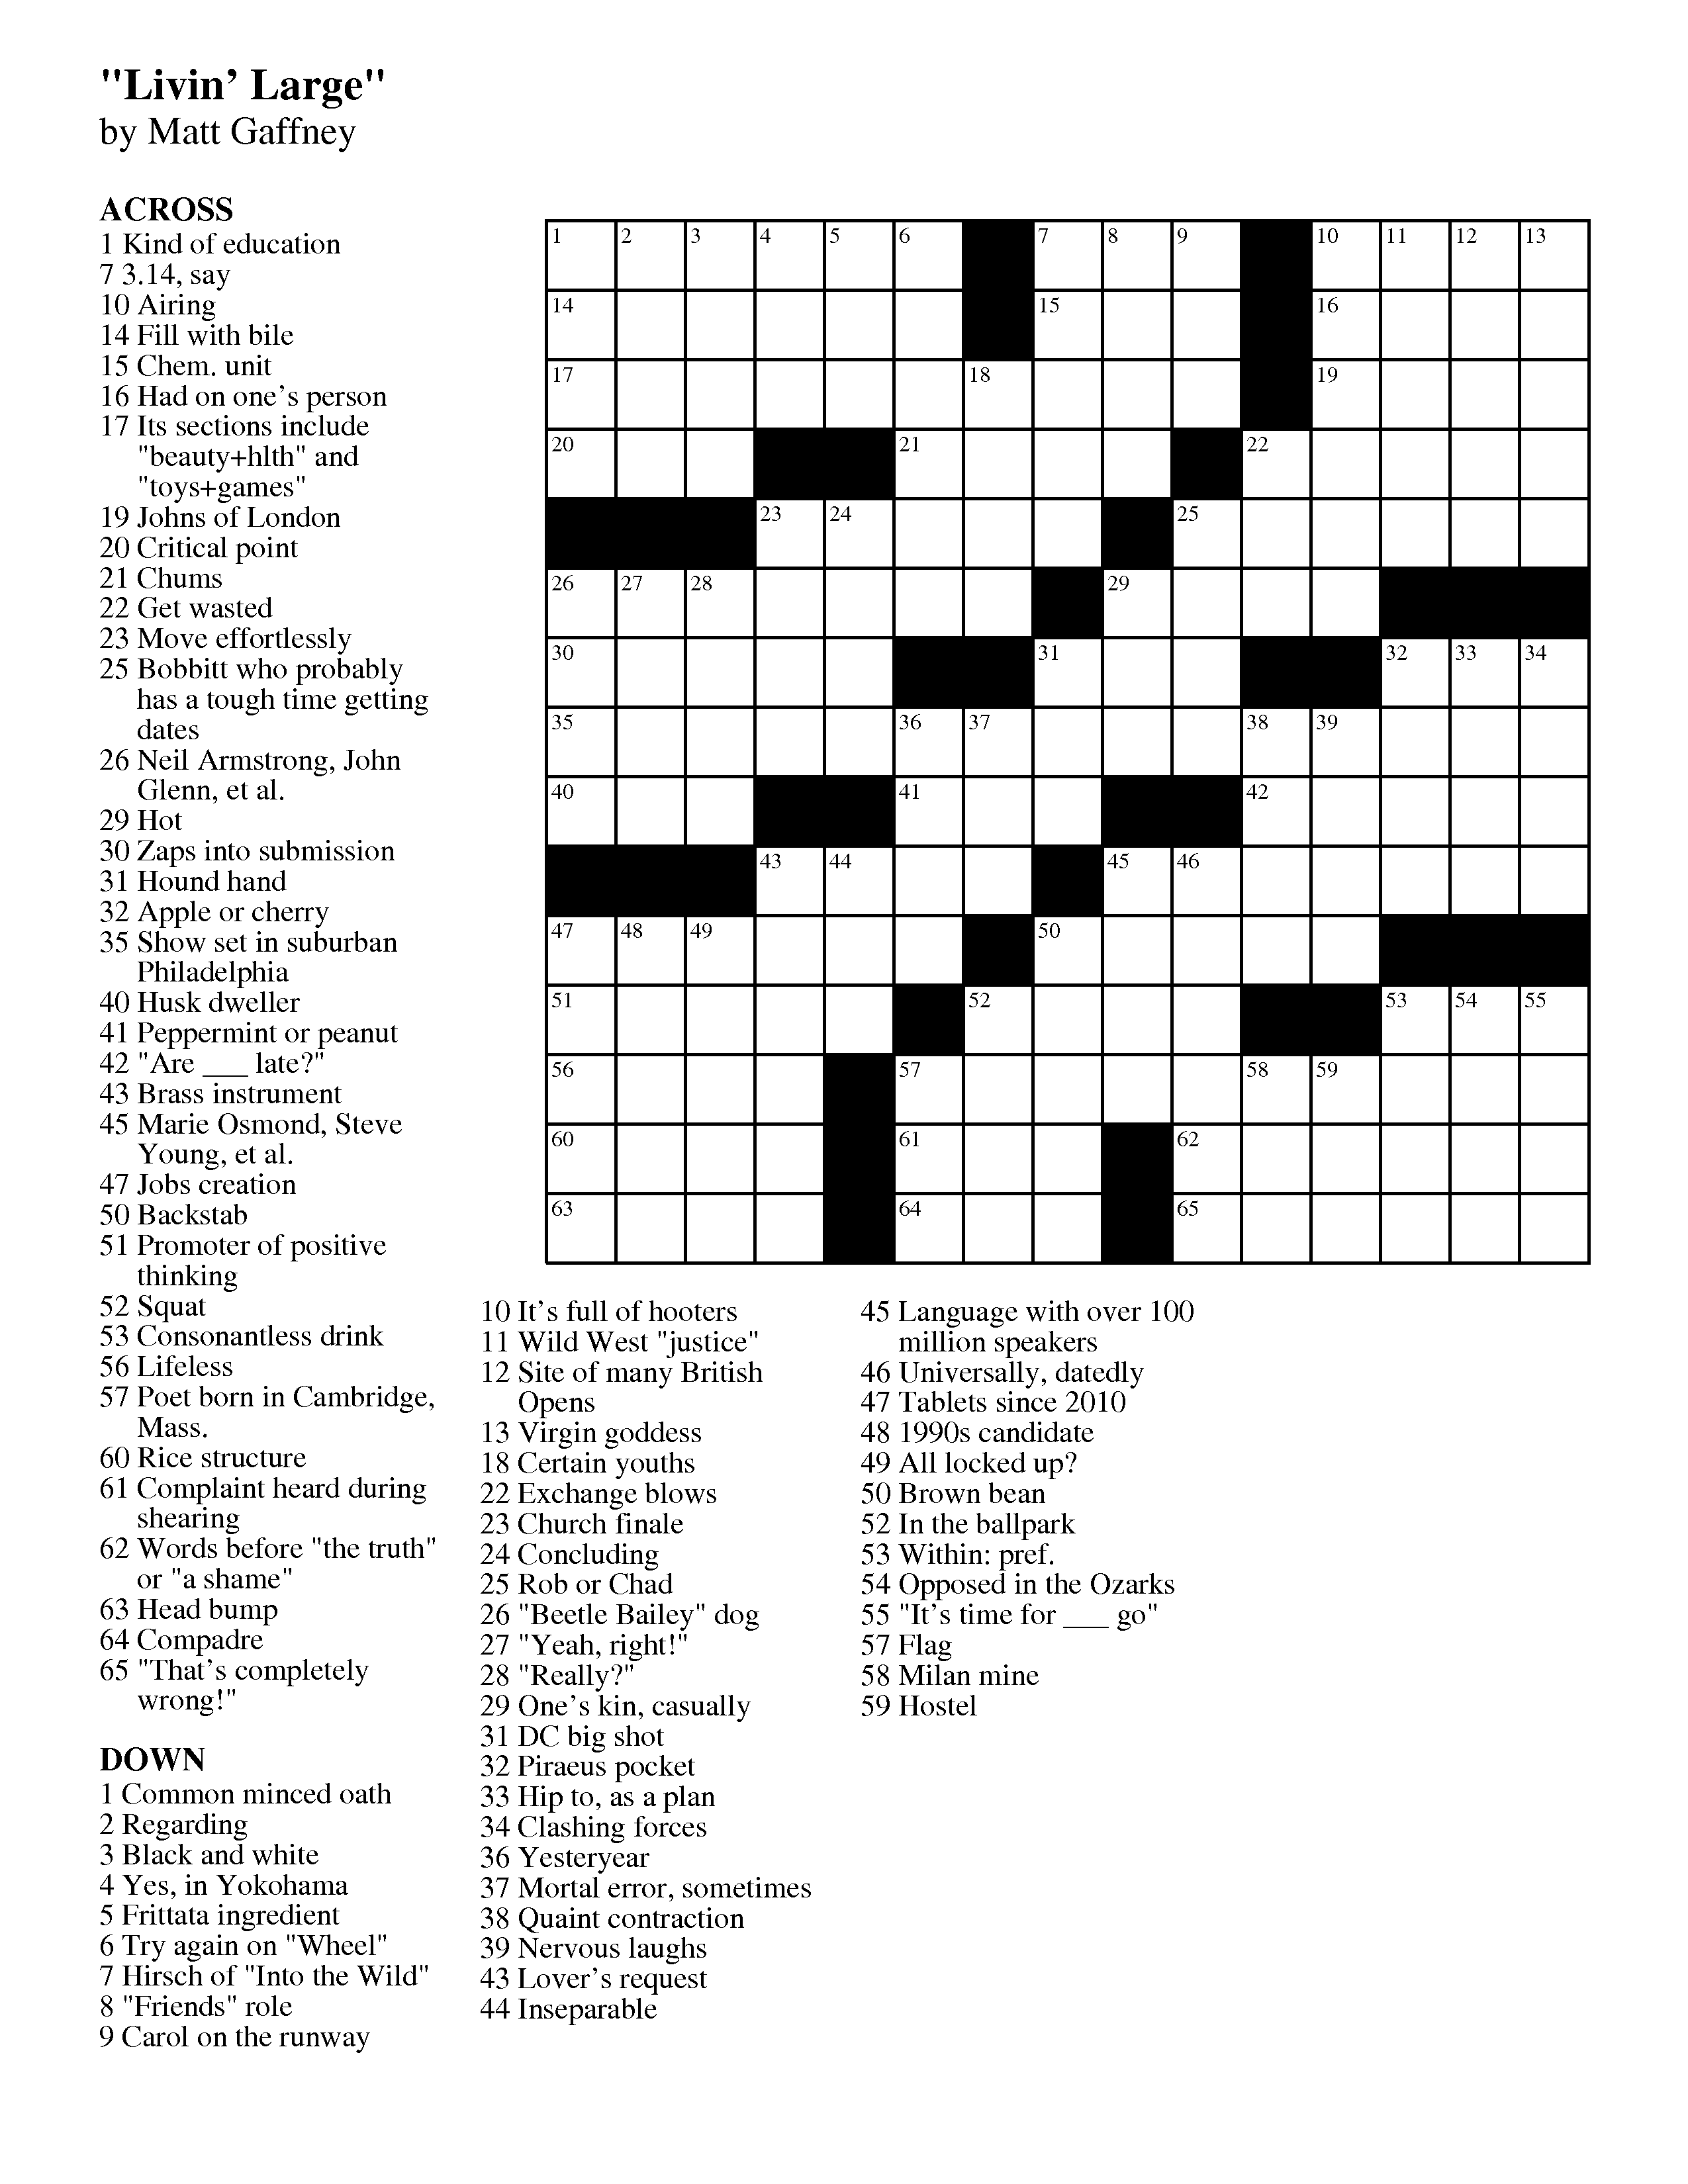 coloring-coloring-free-large-print-crosswords-easy-for-seniors